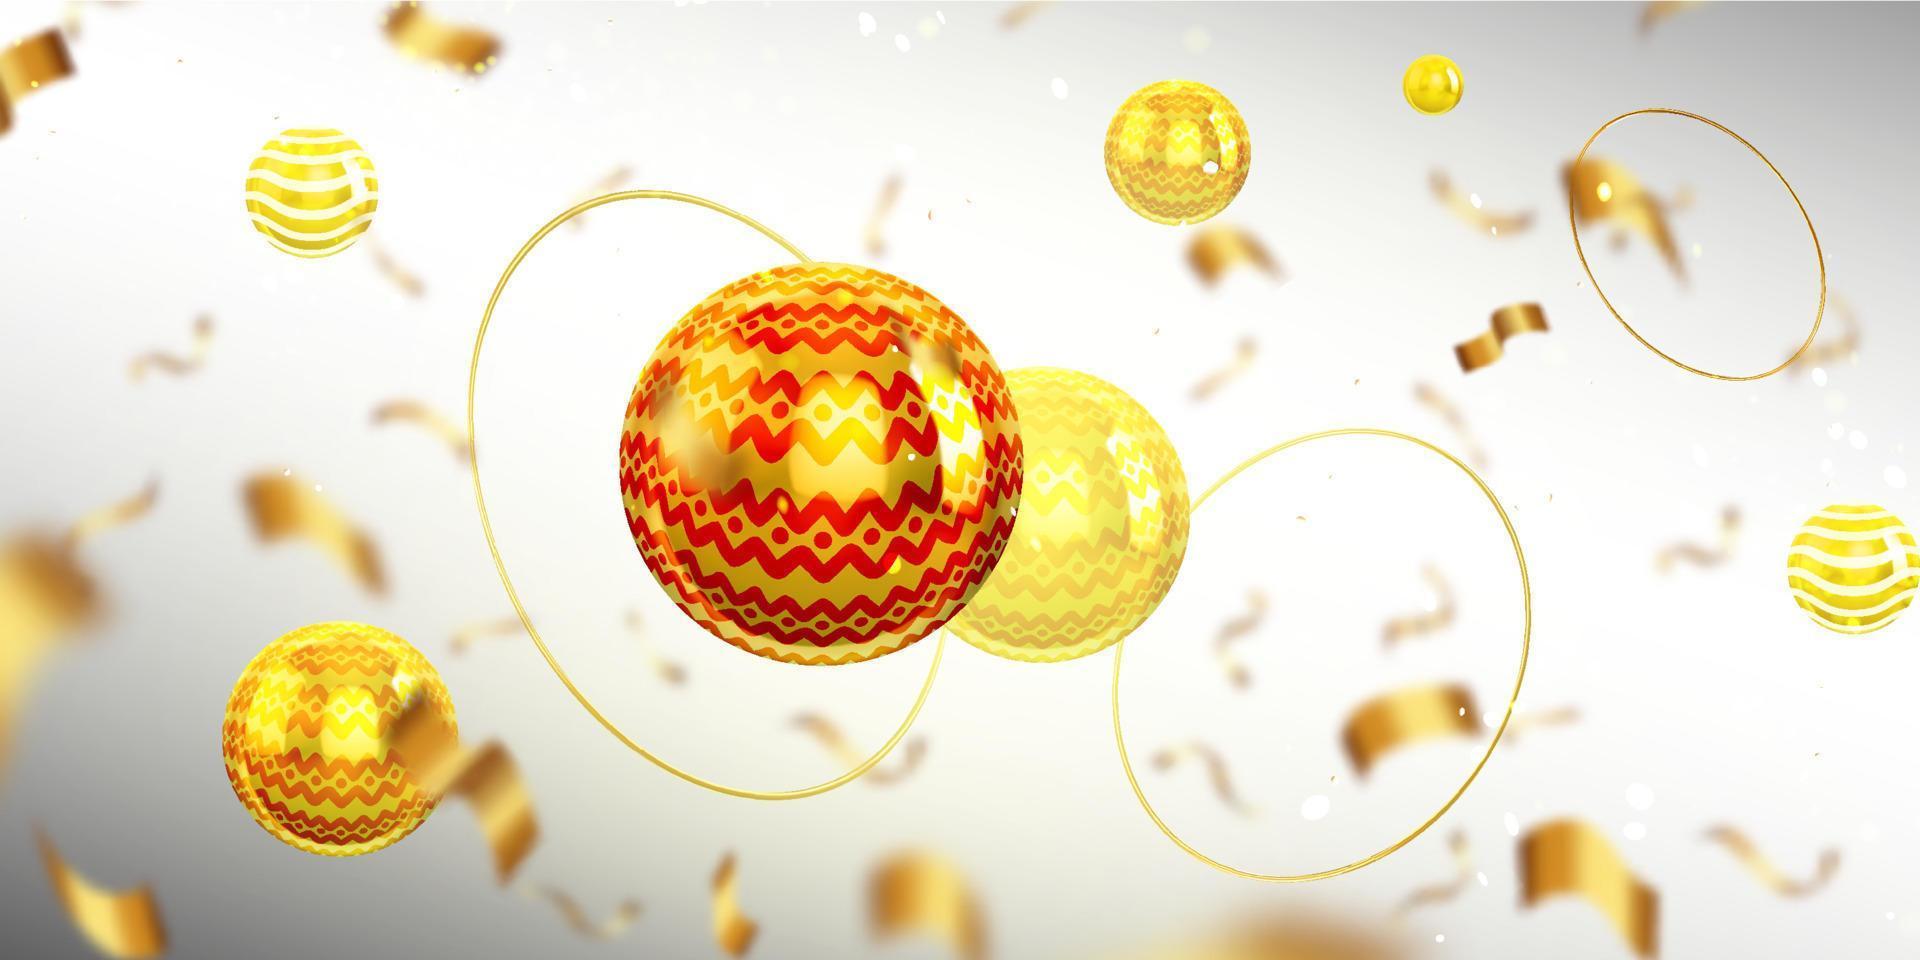 Abstract background with 3d balls, gold confetti vector